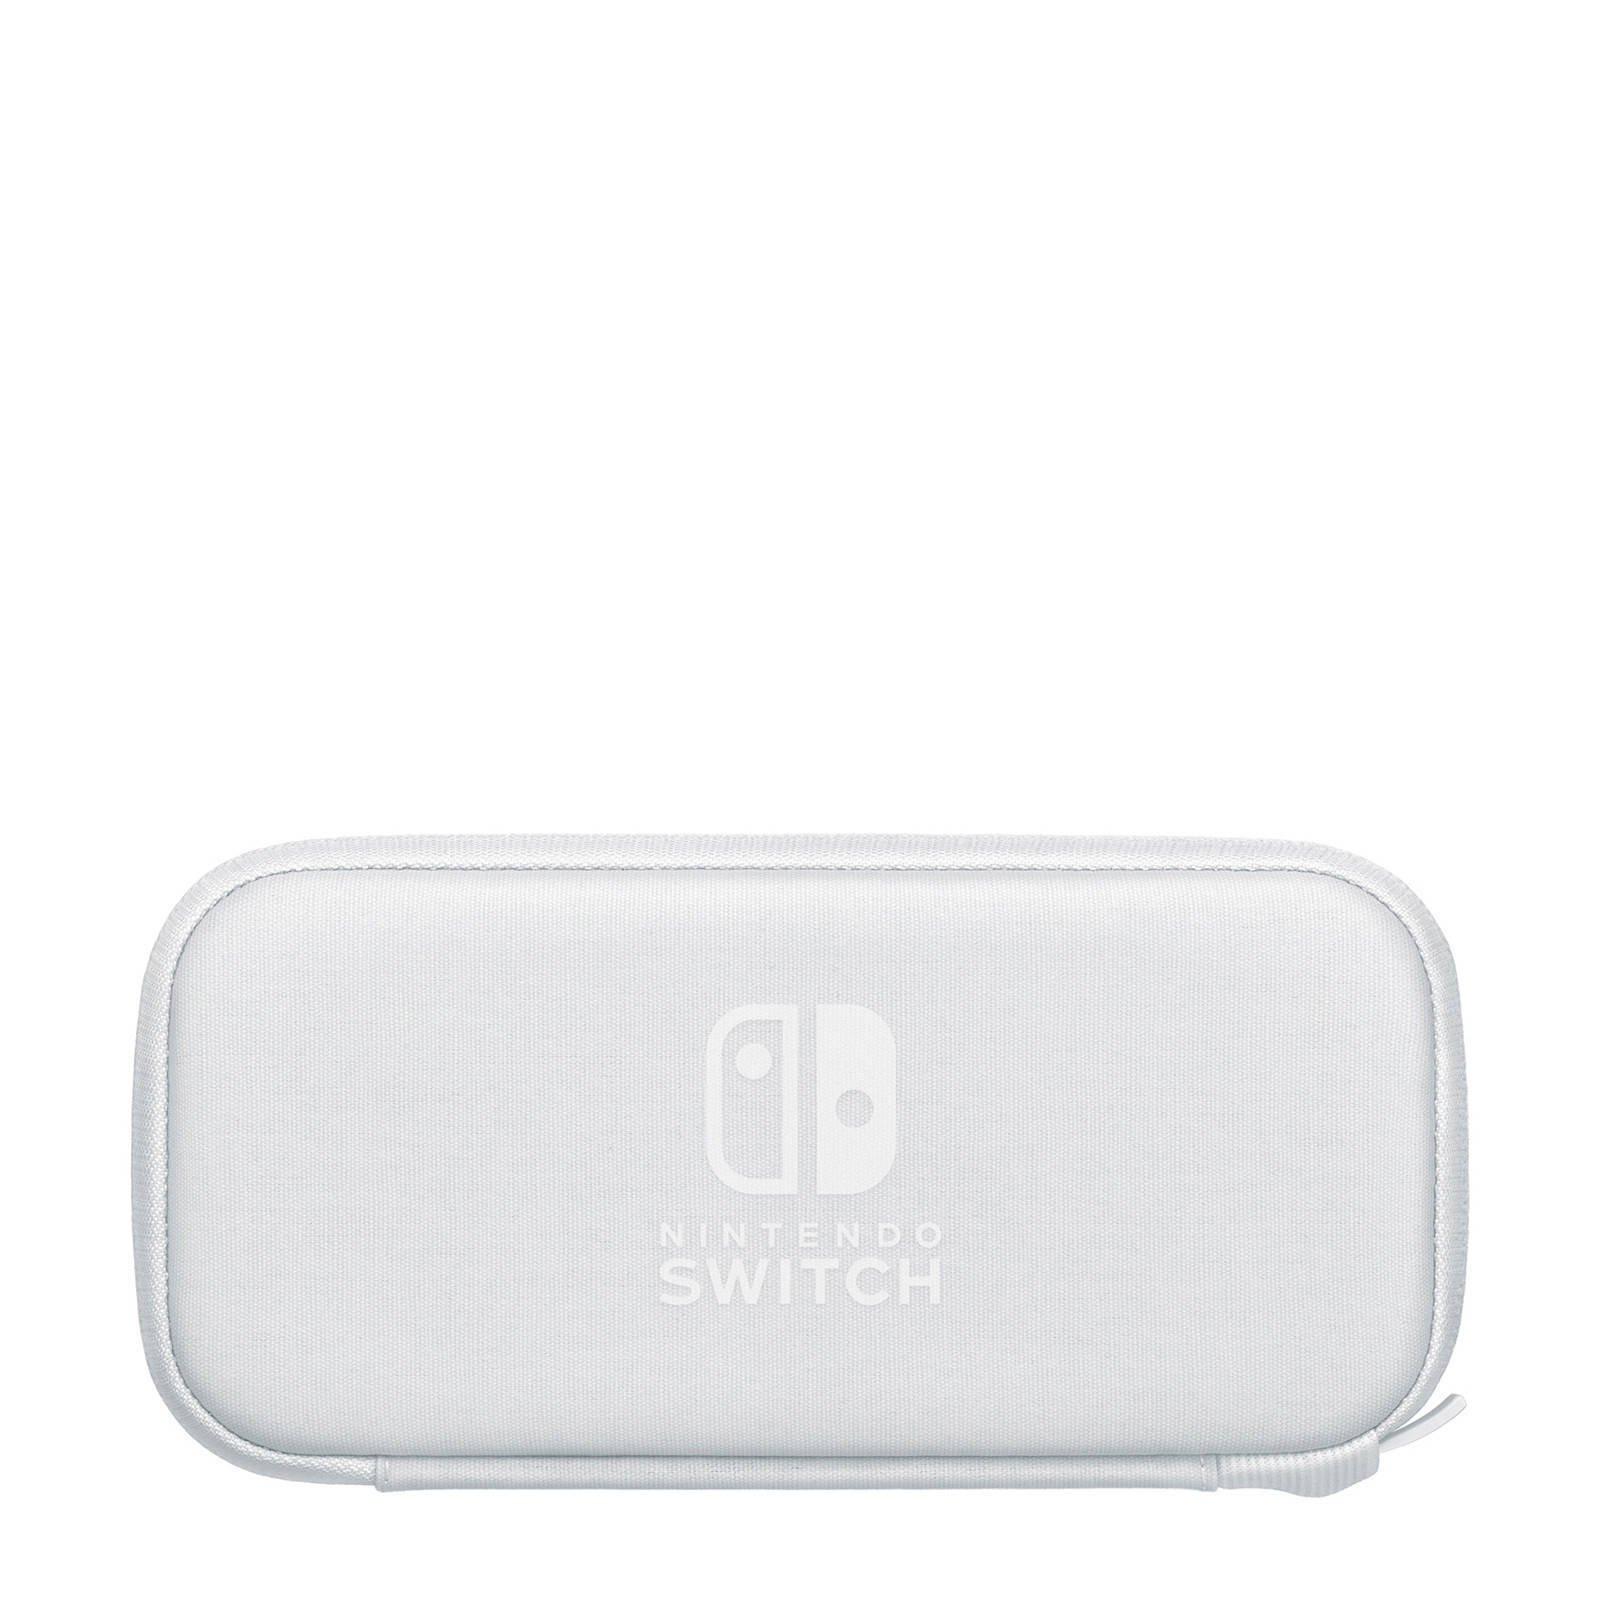 nintendo switch lite carrying case & screen protector